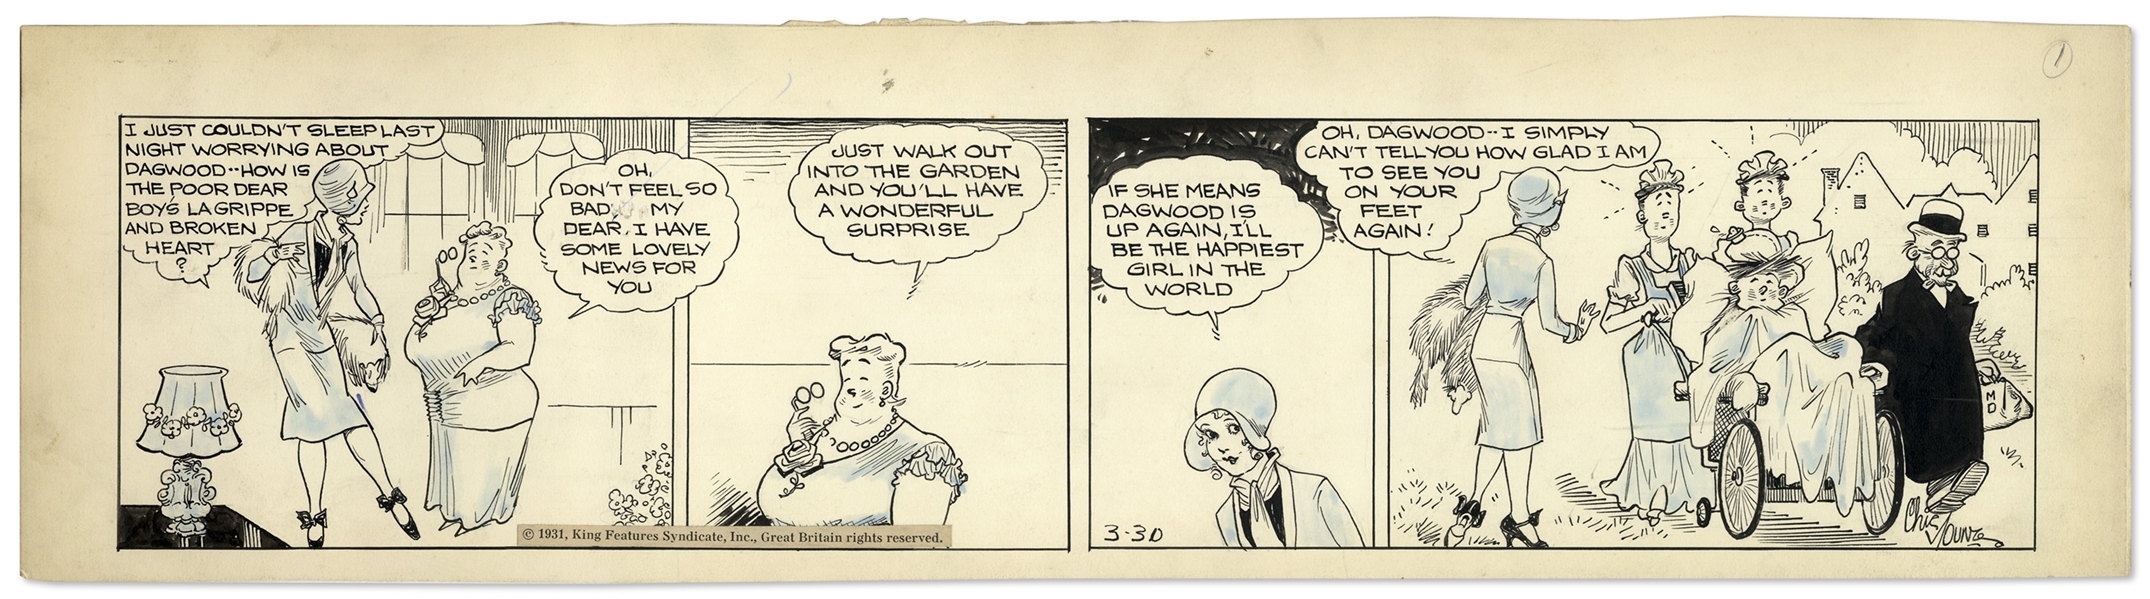 Chic Young Hand-Drawn ''Blondie'' Comic Strip From 1931 Titled ''The Pedestrian'' -- Dagwood Is Recovering From a Broken Heart